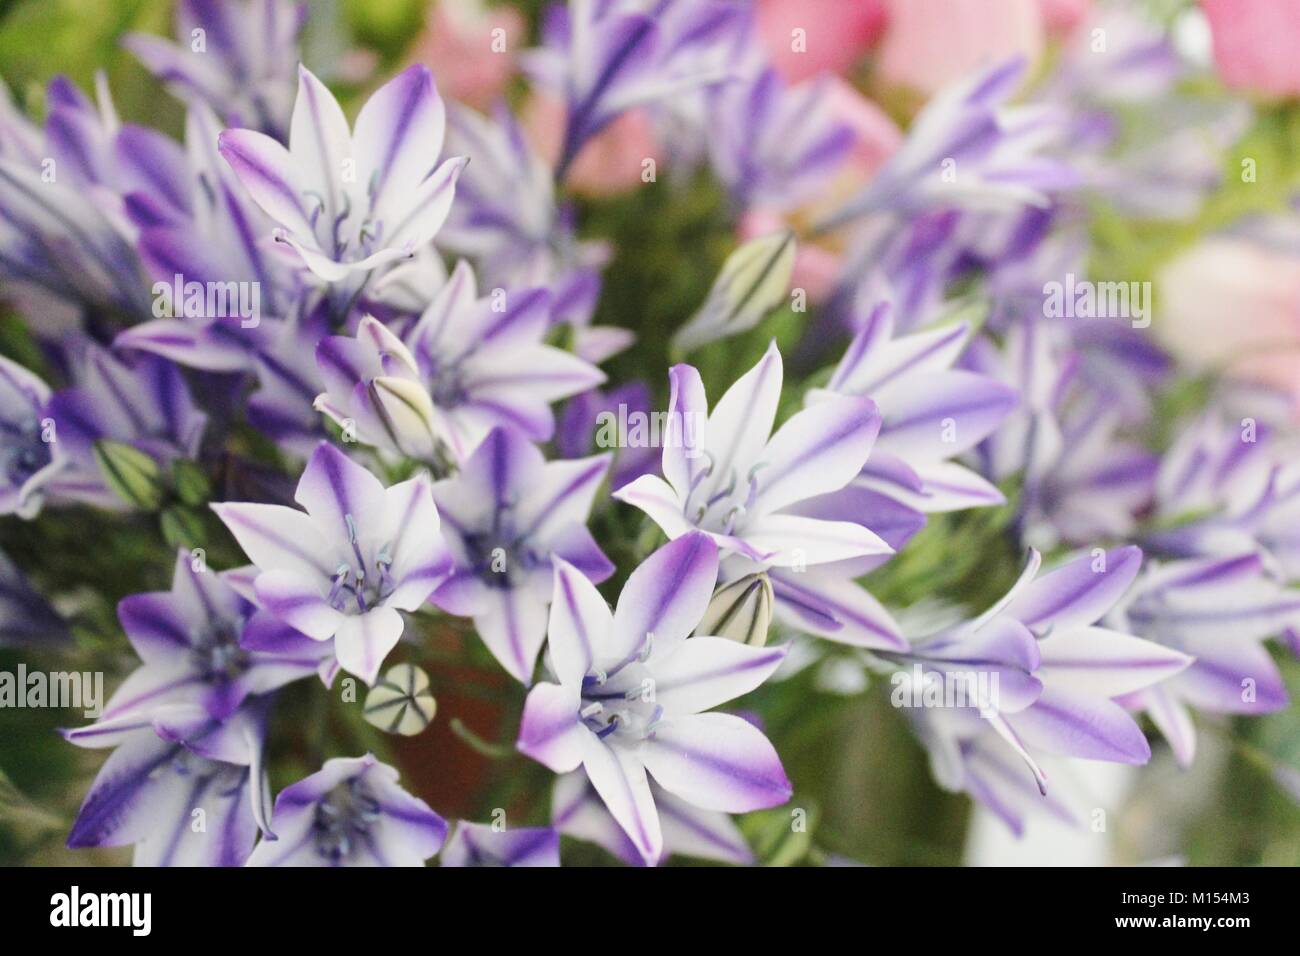 white and purple bunch of flowers in a flower shop Stock Photo